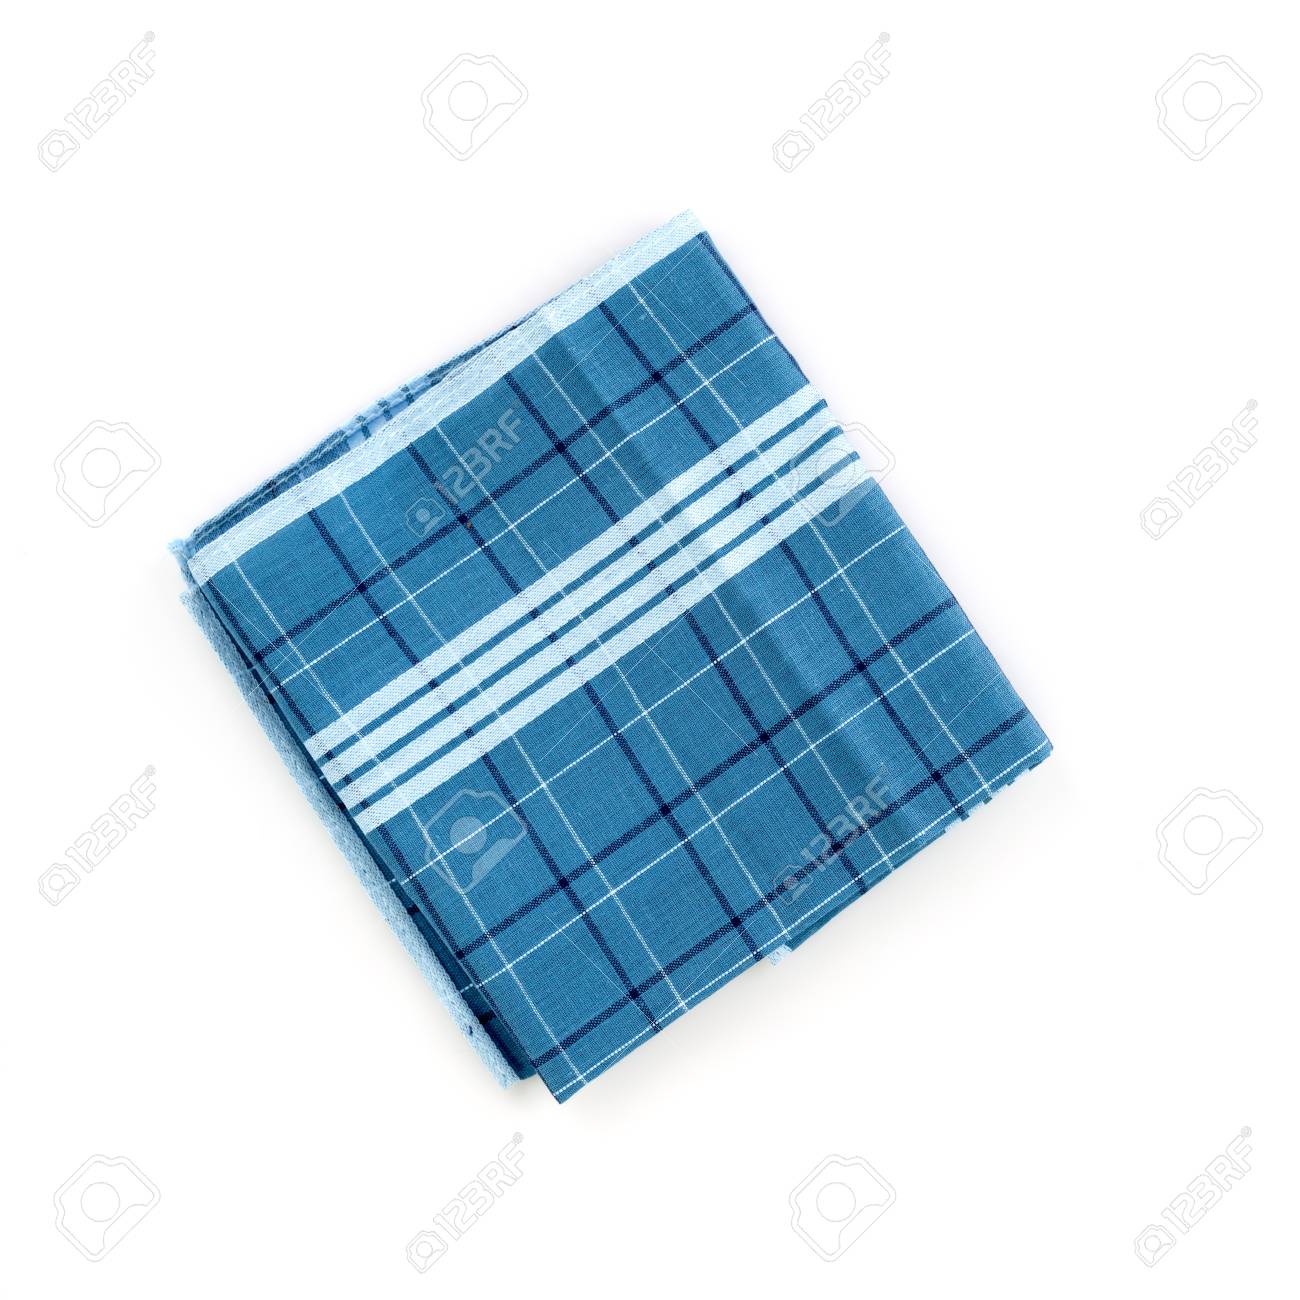 Close Up Of Handkerchief On White Background Stock Photo Picture